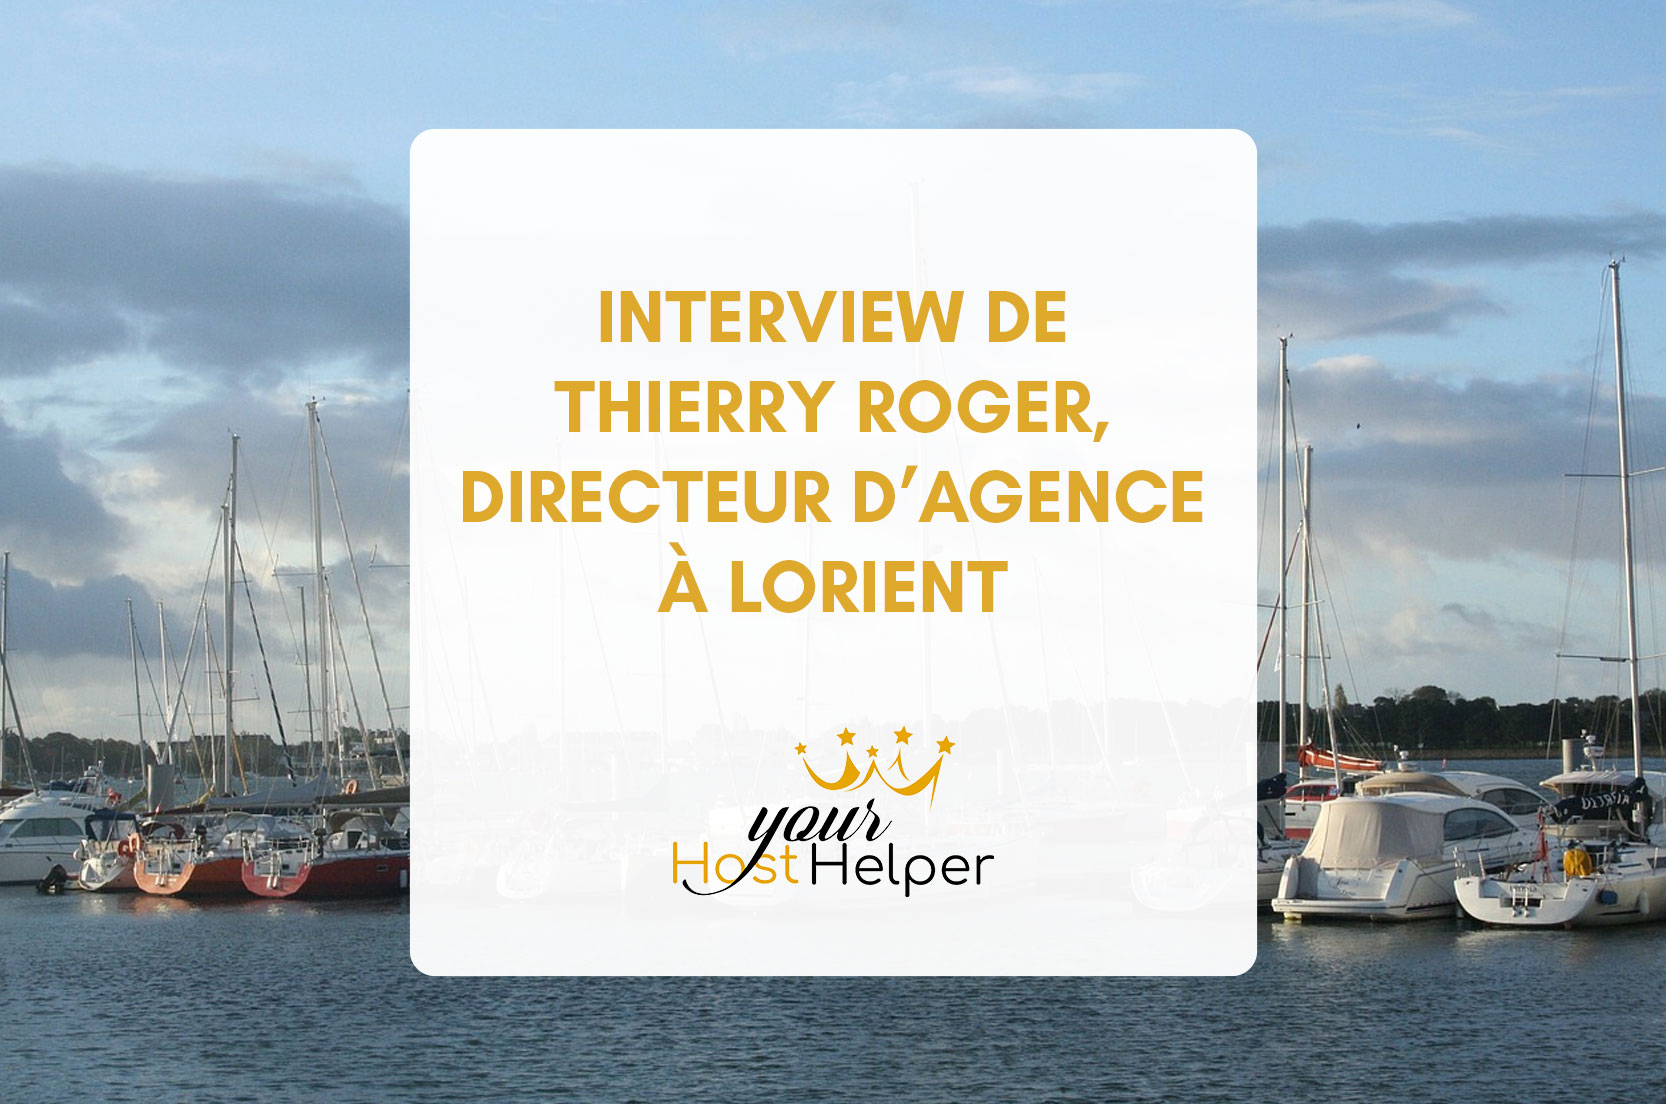 You are currently viewing Interview de Thierry Roger, directeur d’agence à Lorient